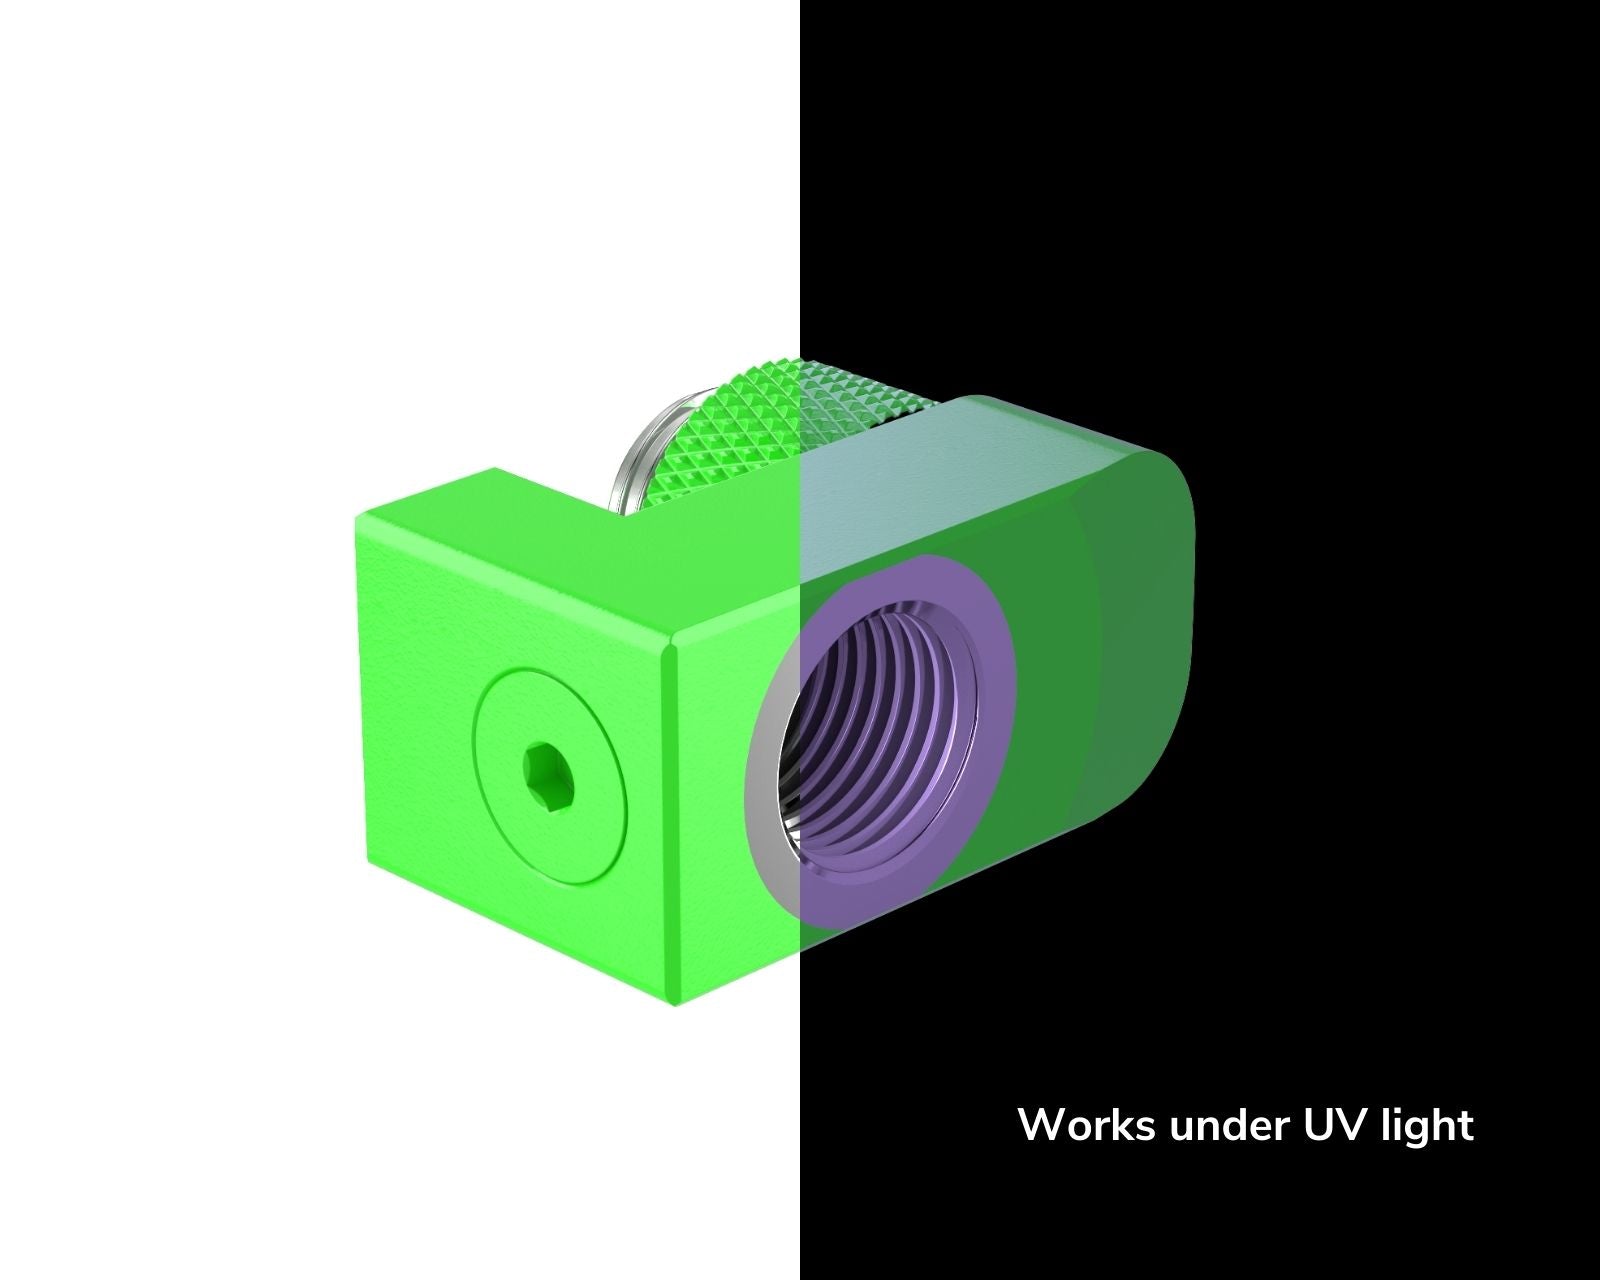 PrimoChill Male to Female G 1/4in. Supported Offset Rotary Fitting - UV Green